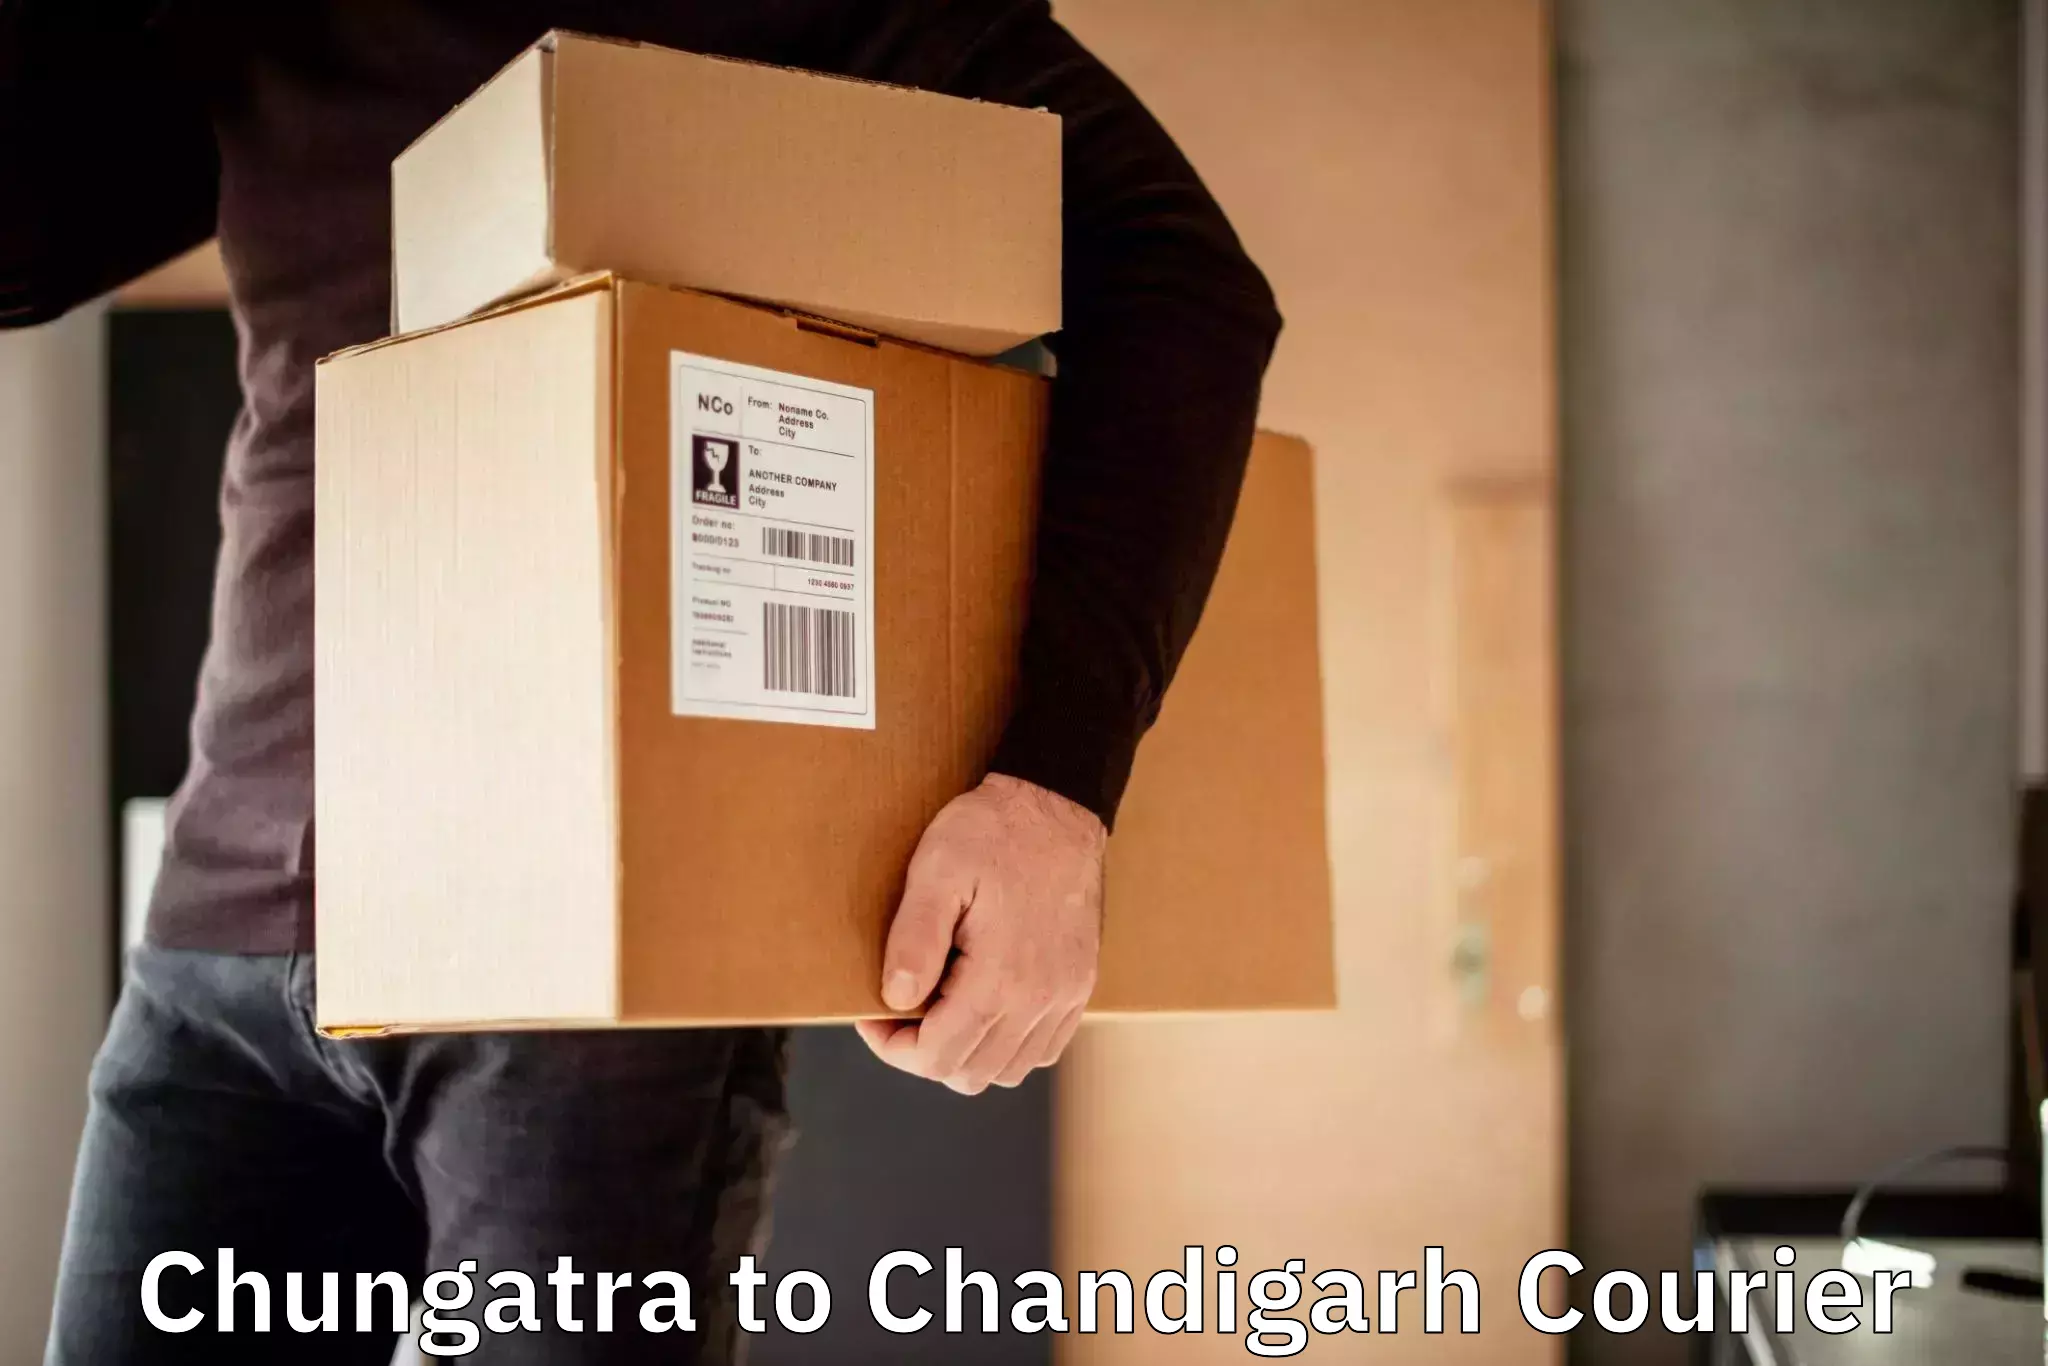 Same-day delivery options Chungatra to Chandigarh